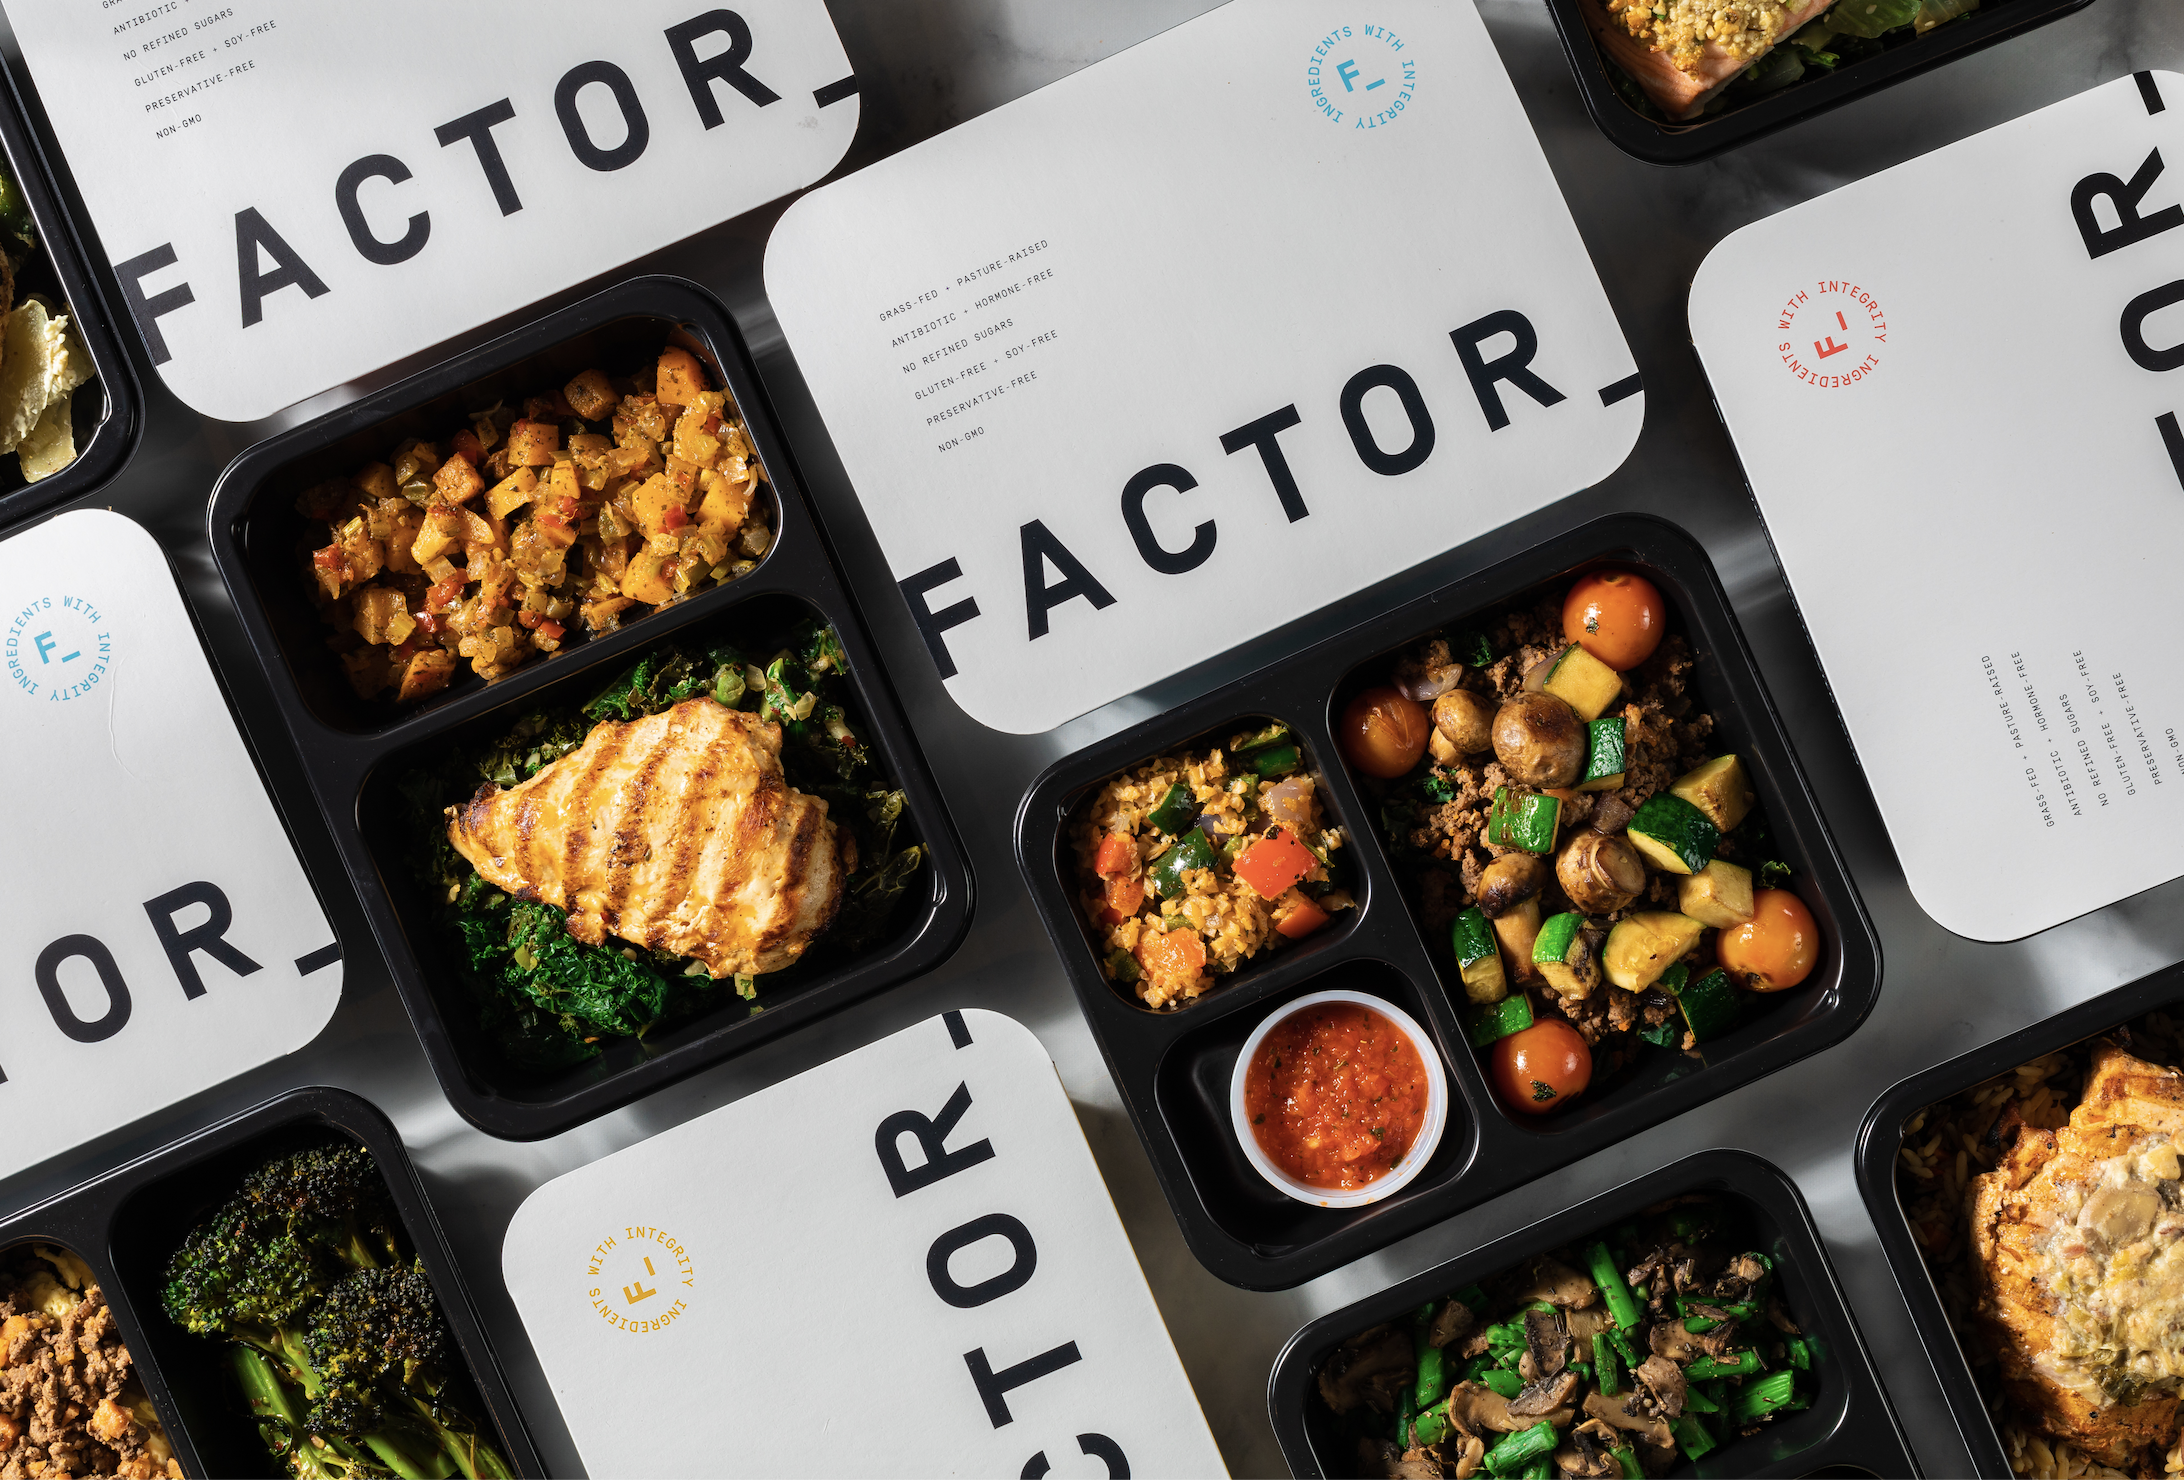 15 Best Healthy Meal Delivery Kits in 2023 for Painless Prep